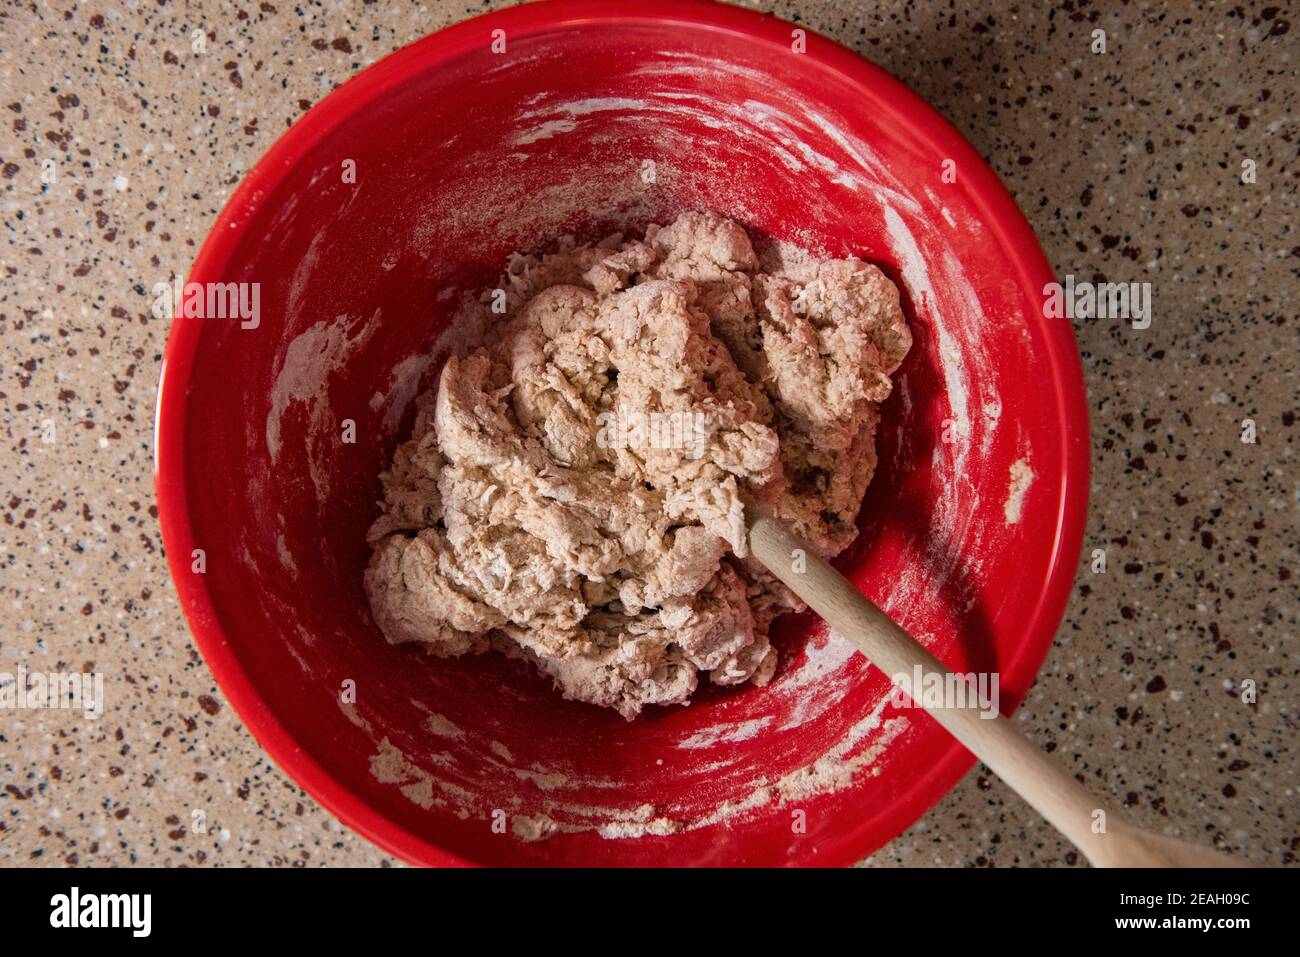 Mixing a bowl of ingredients for making bread. Series step-by-step making homemade bread.  Frame 3 of 13 Stock Photo